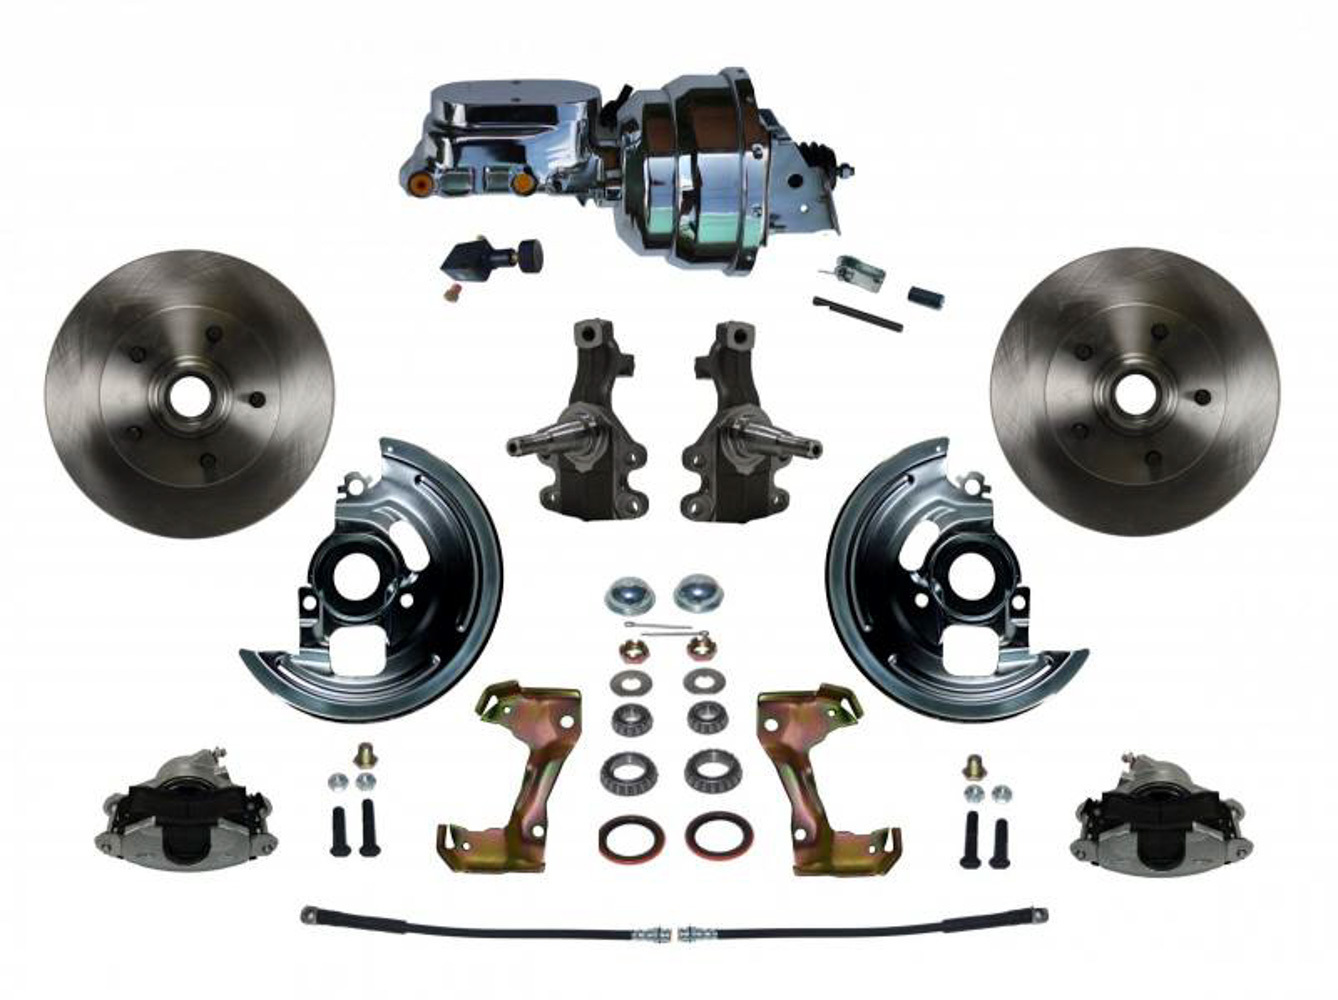 Leed Brakes FC1003-N605 Brake System, Power Disc Conversion, Front, 1 Piston Caliper, 11 in Solid Rotors, Booster / Master Cylinder, Iron, Natural, GM A-Body 1964-72 / F-Body 1967-69 / X-Body 1968-74, Kit